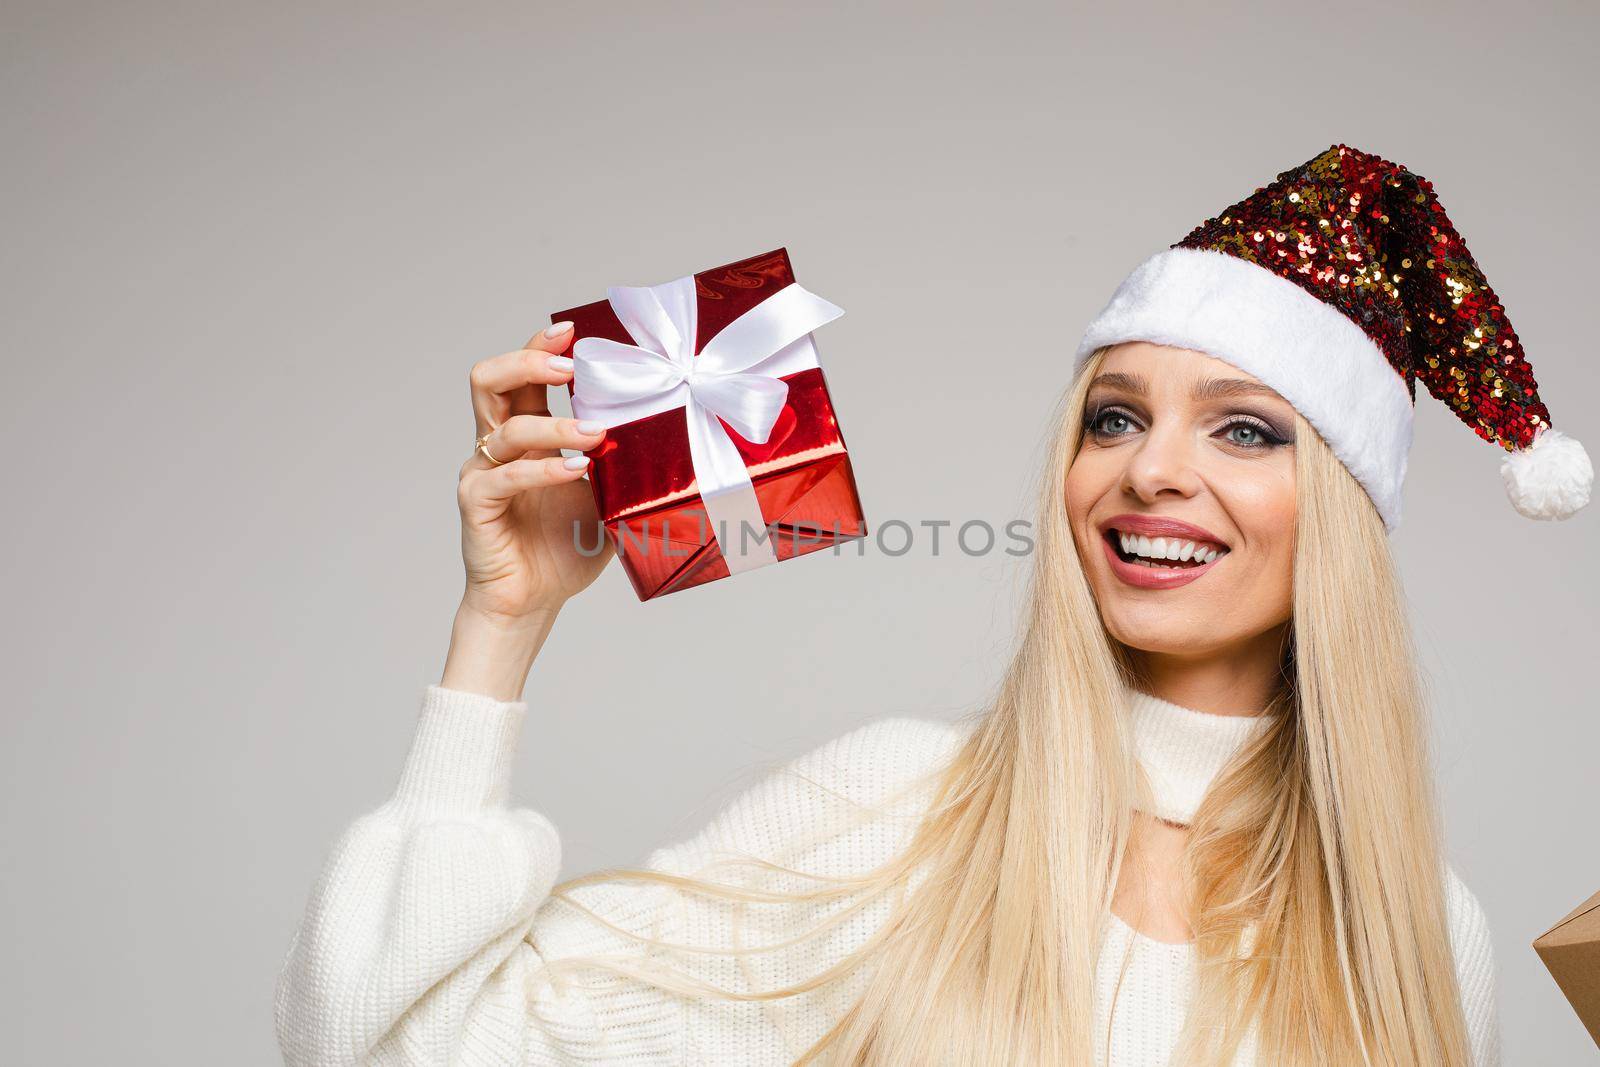 Portrait of pretty smiling woman holding gift box while looking at camera, isolated on grey background. New Year holiday concept